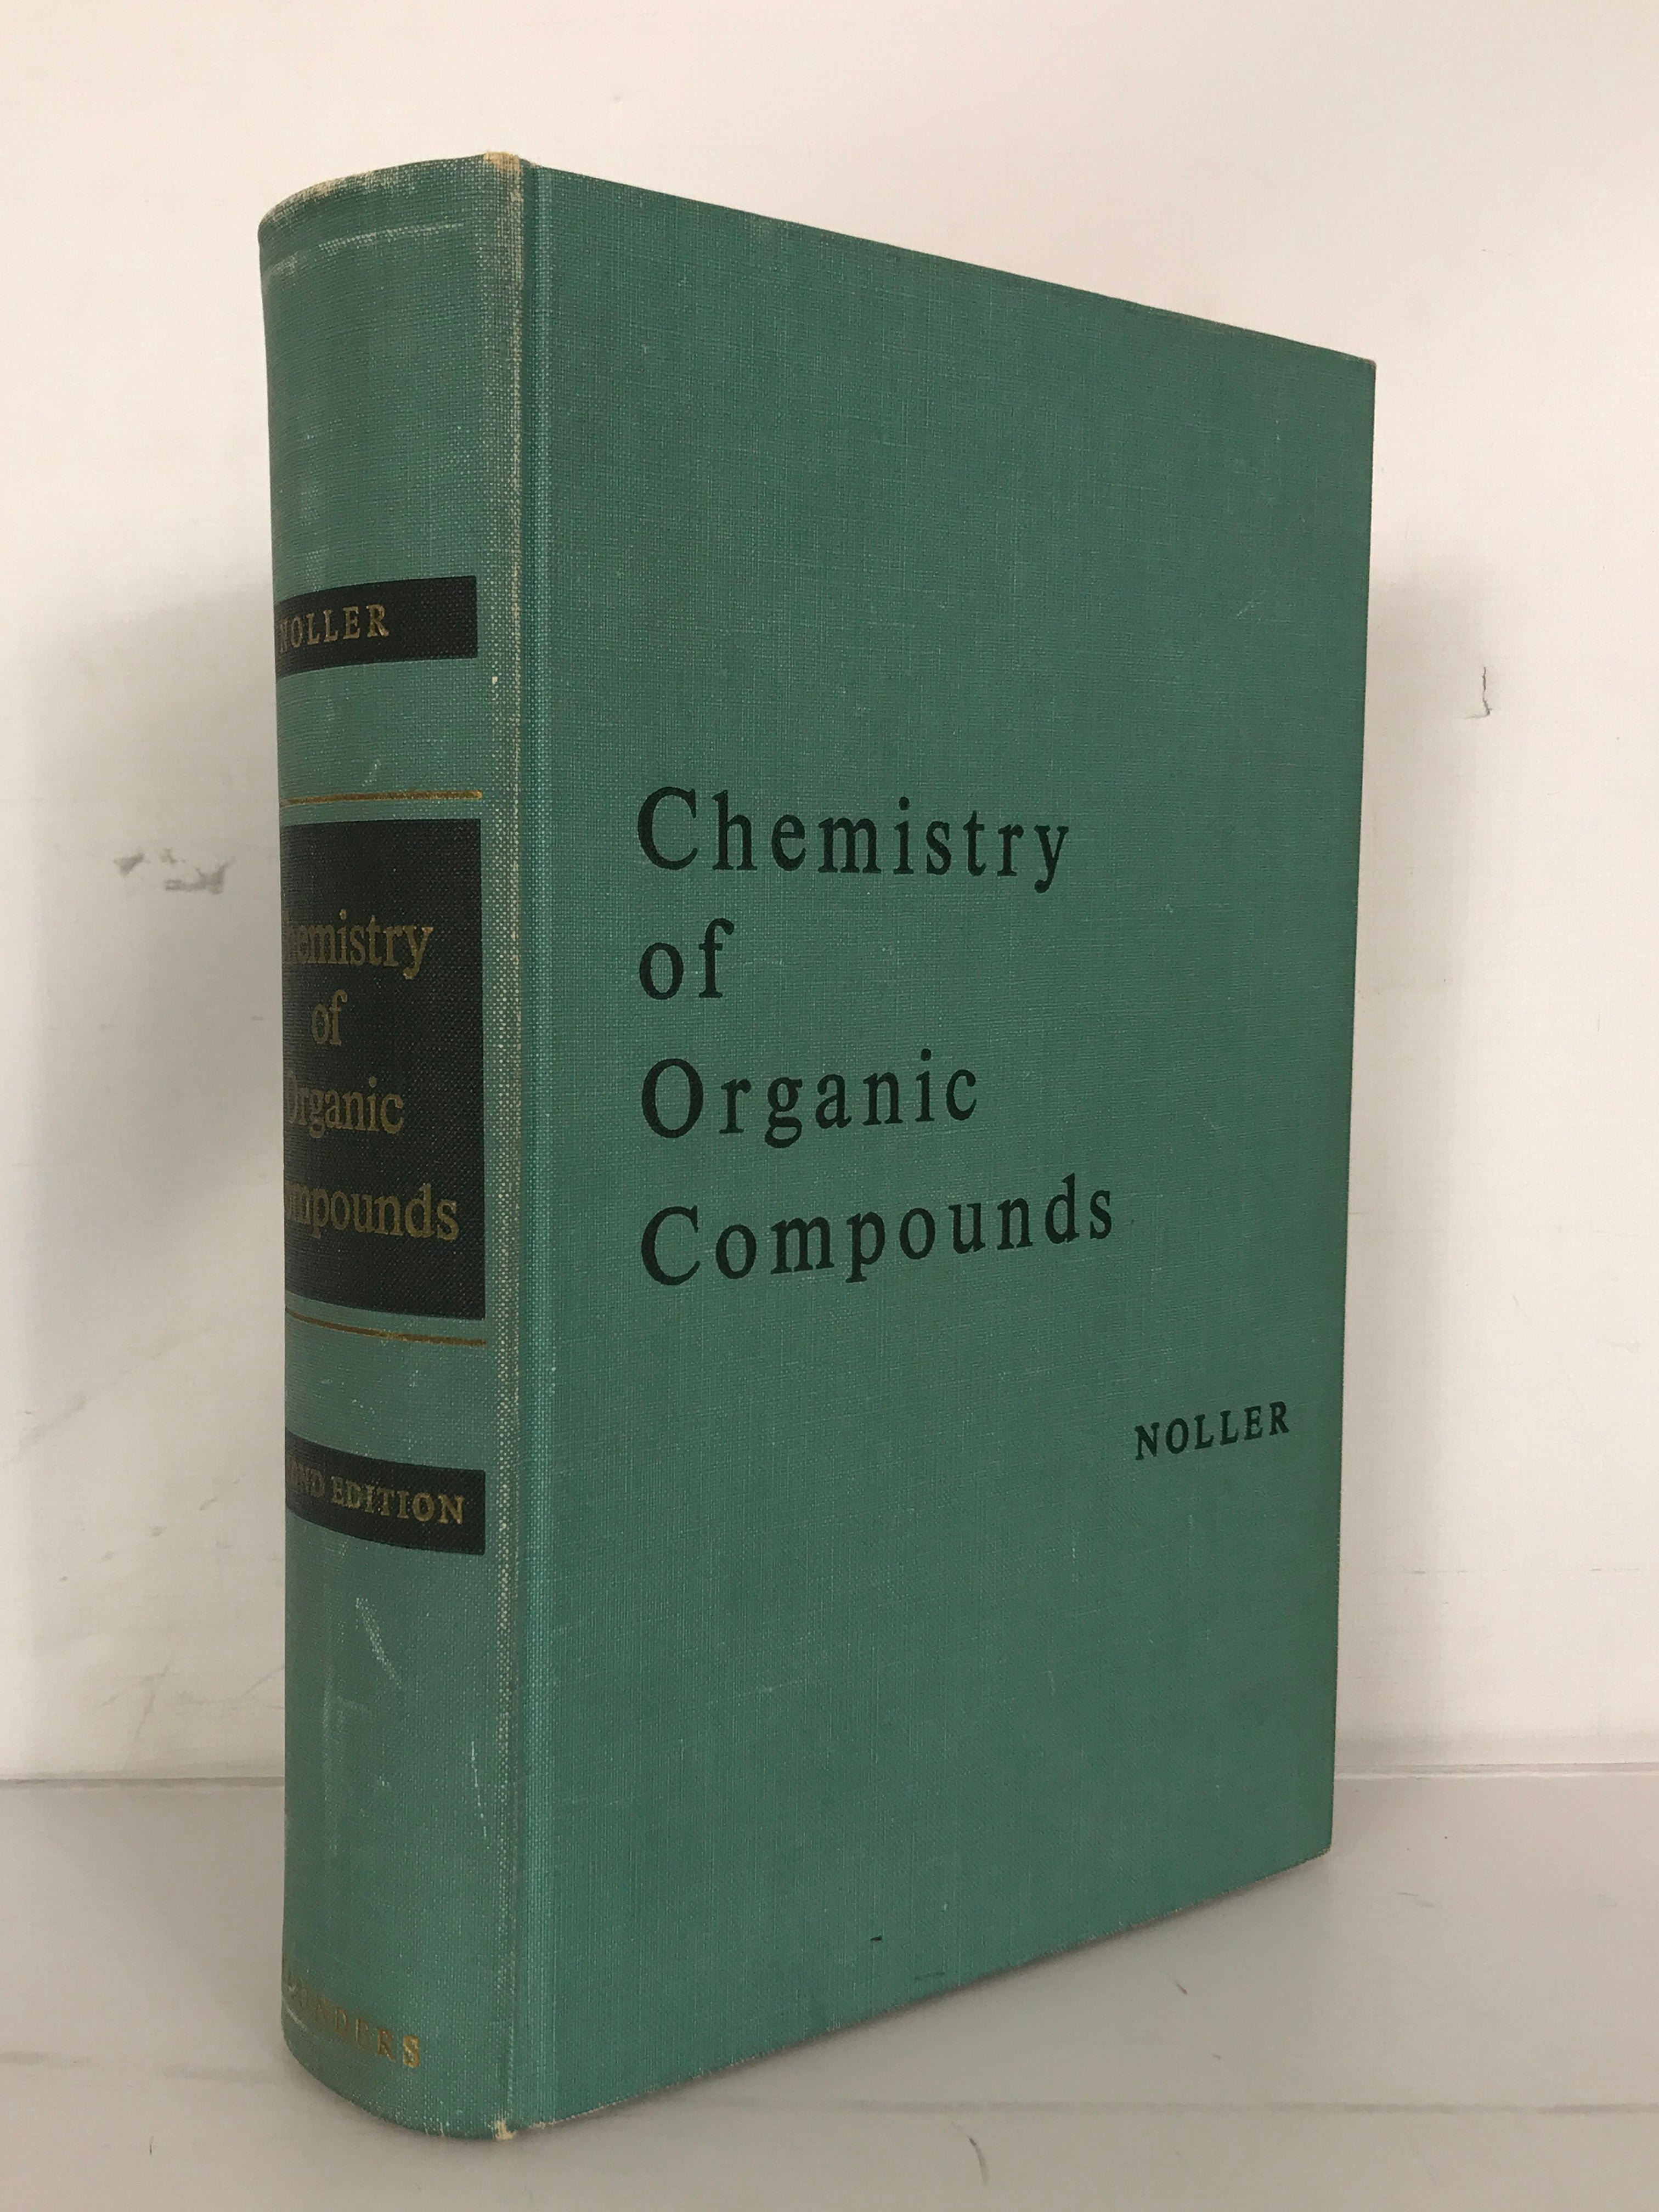 Chemistry of Organic Compounds by Carl Noller Second Edition 1960 HC